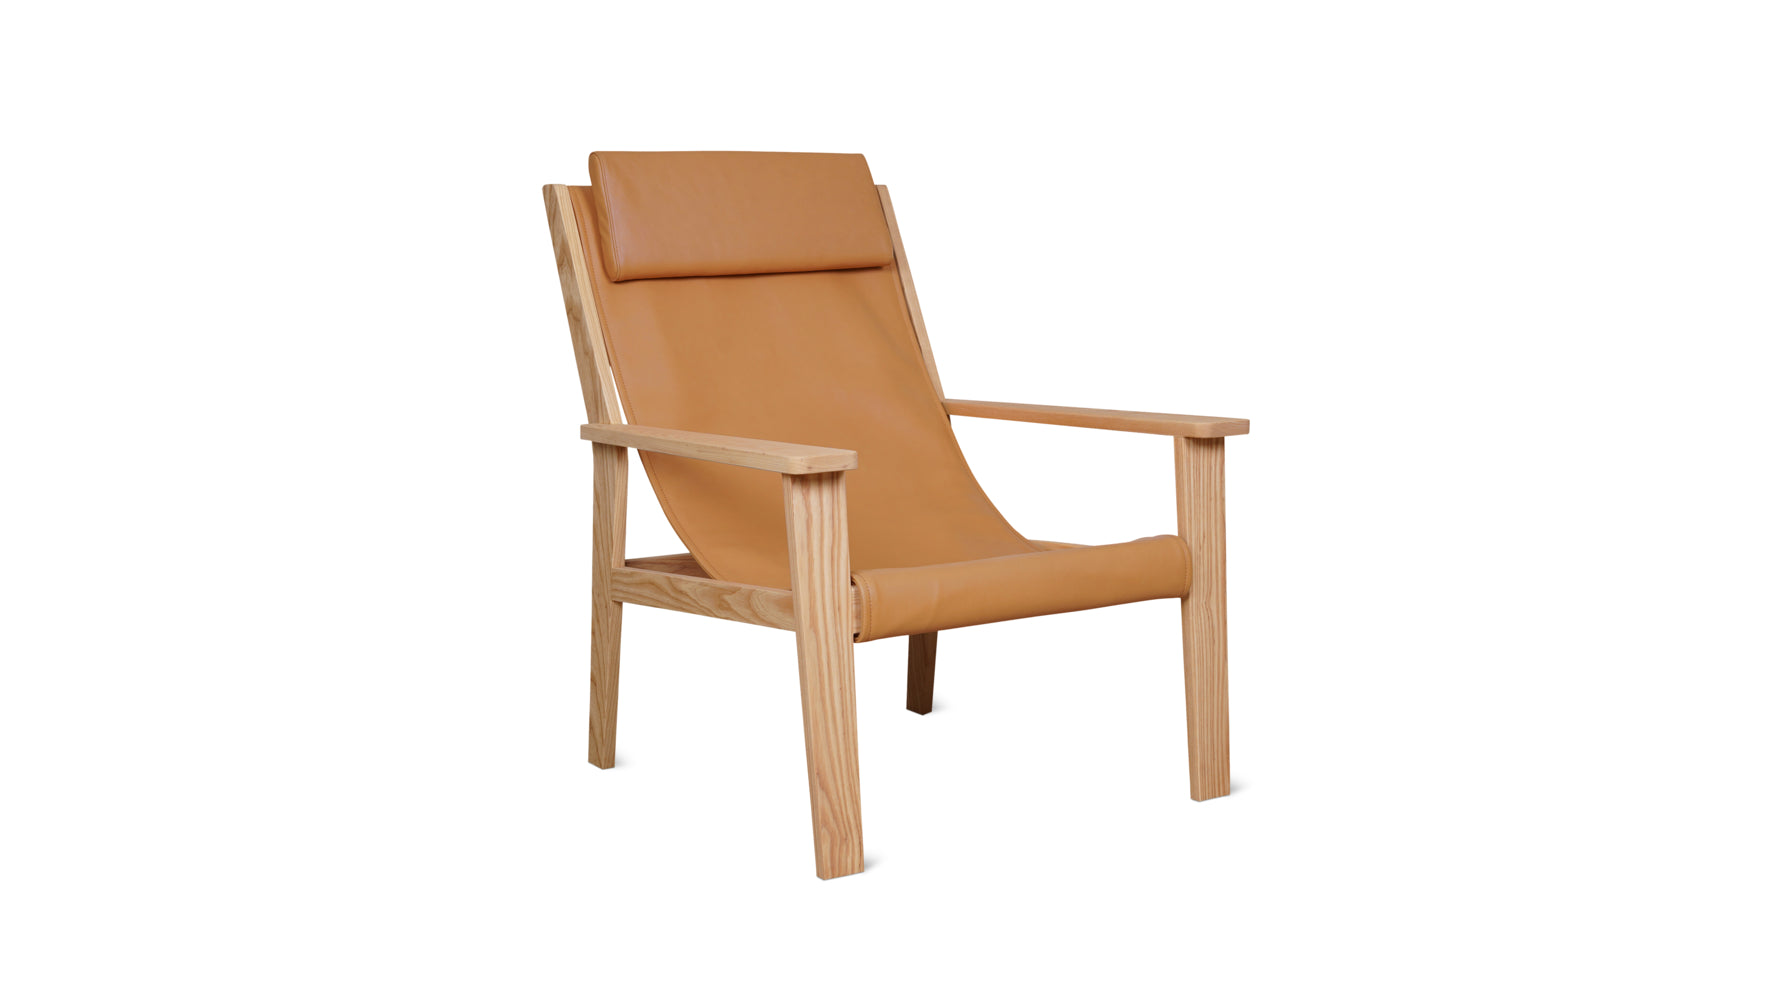 Sweet Life Sling Lounge Chair With Headrest, Terracotta Ash - Image 3